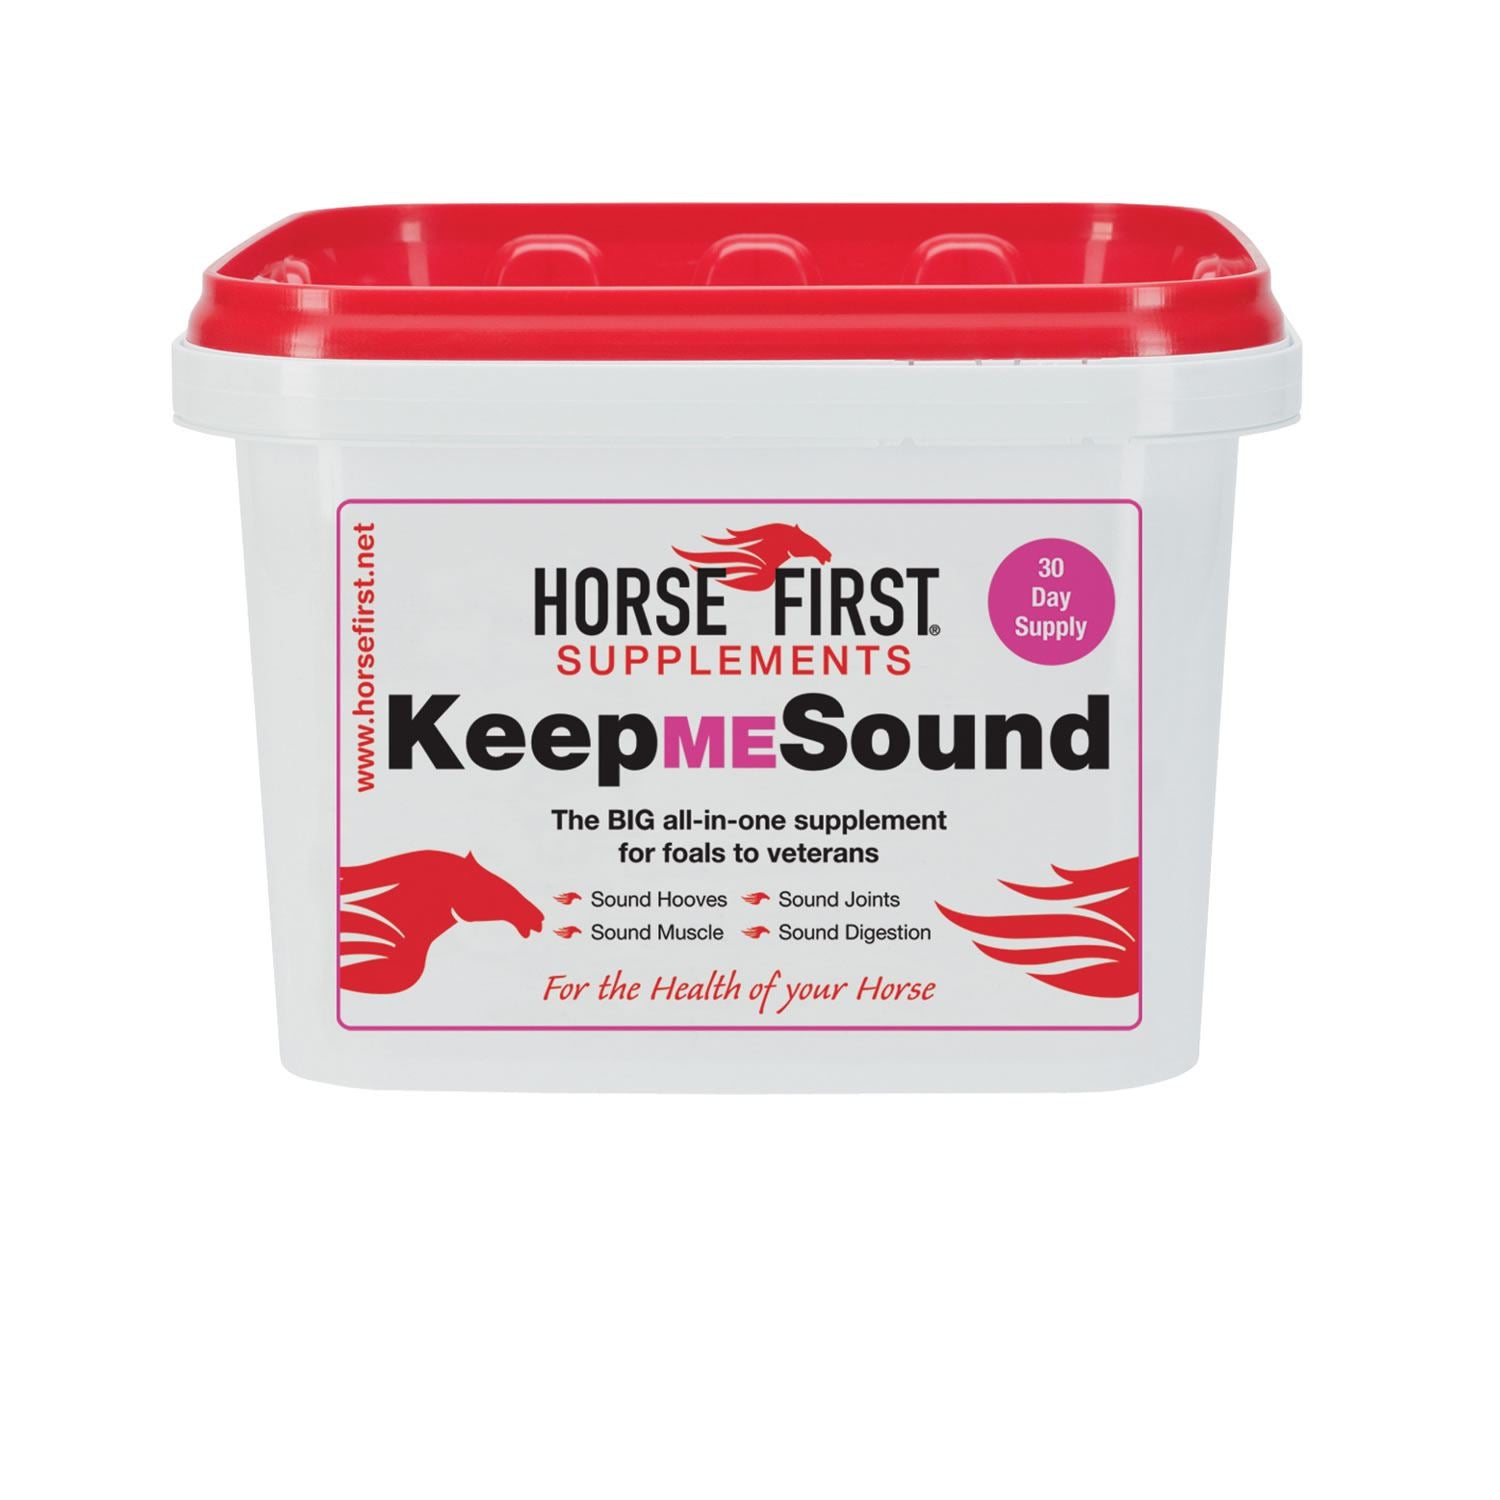 HORSE FIRST KEEP ME SOUND: Cares for joints, hooves, coat, and assists the digestive system.